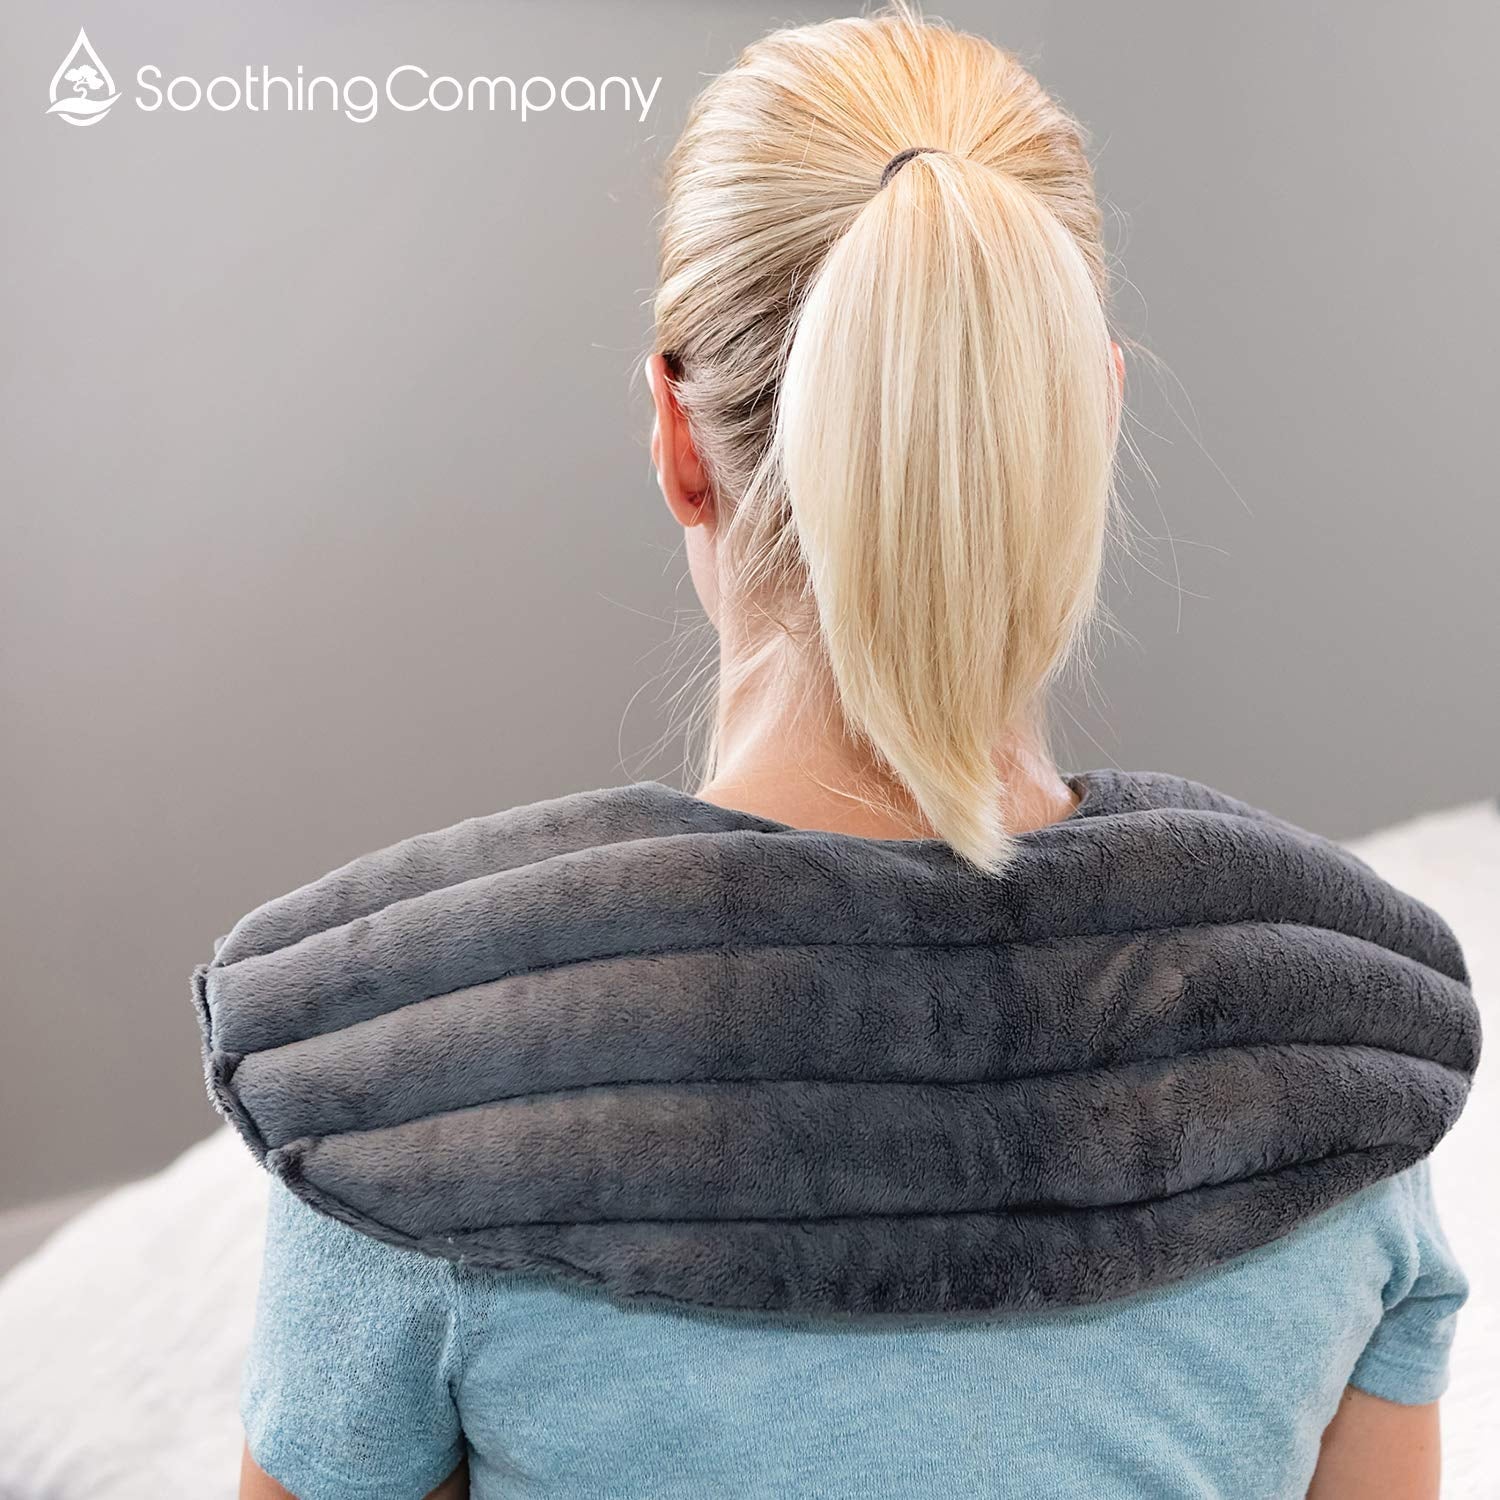 Microwavable Neck and Shoulder Wrap